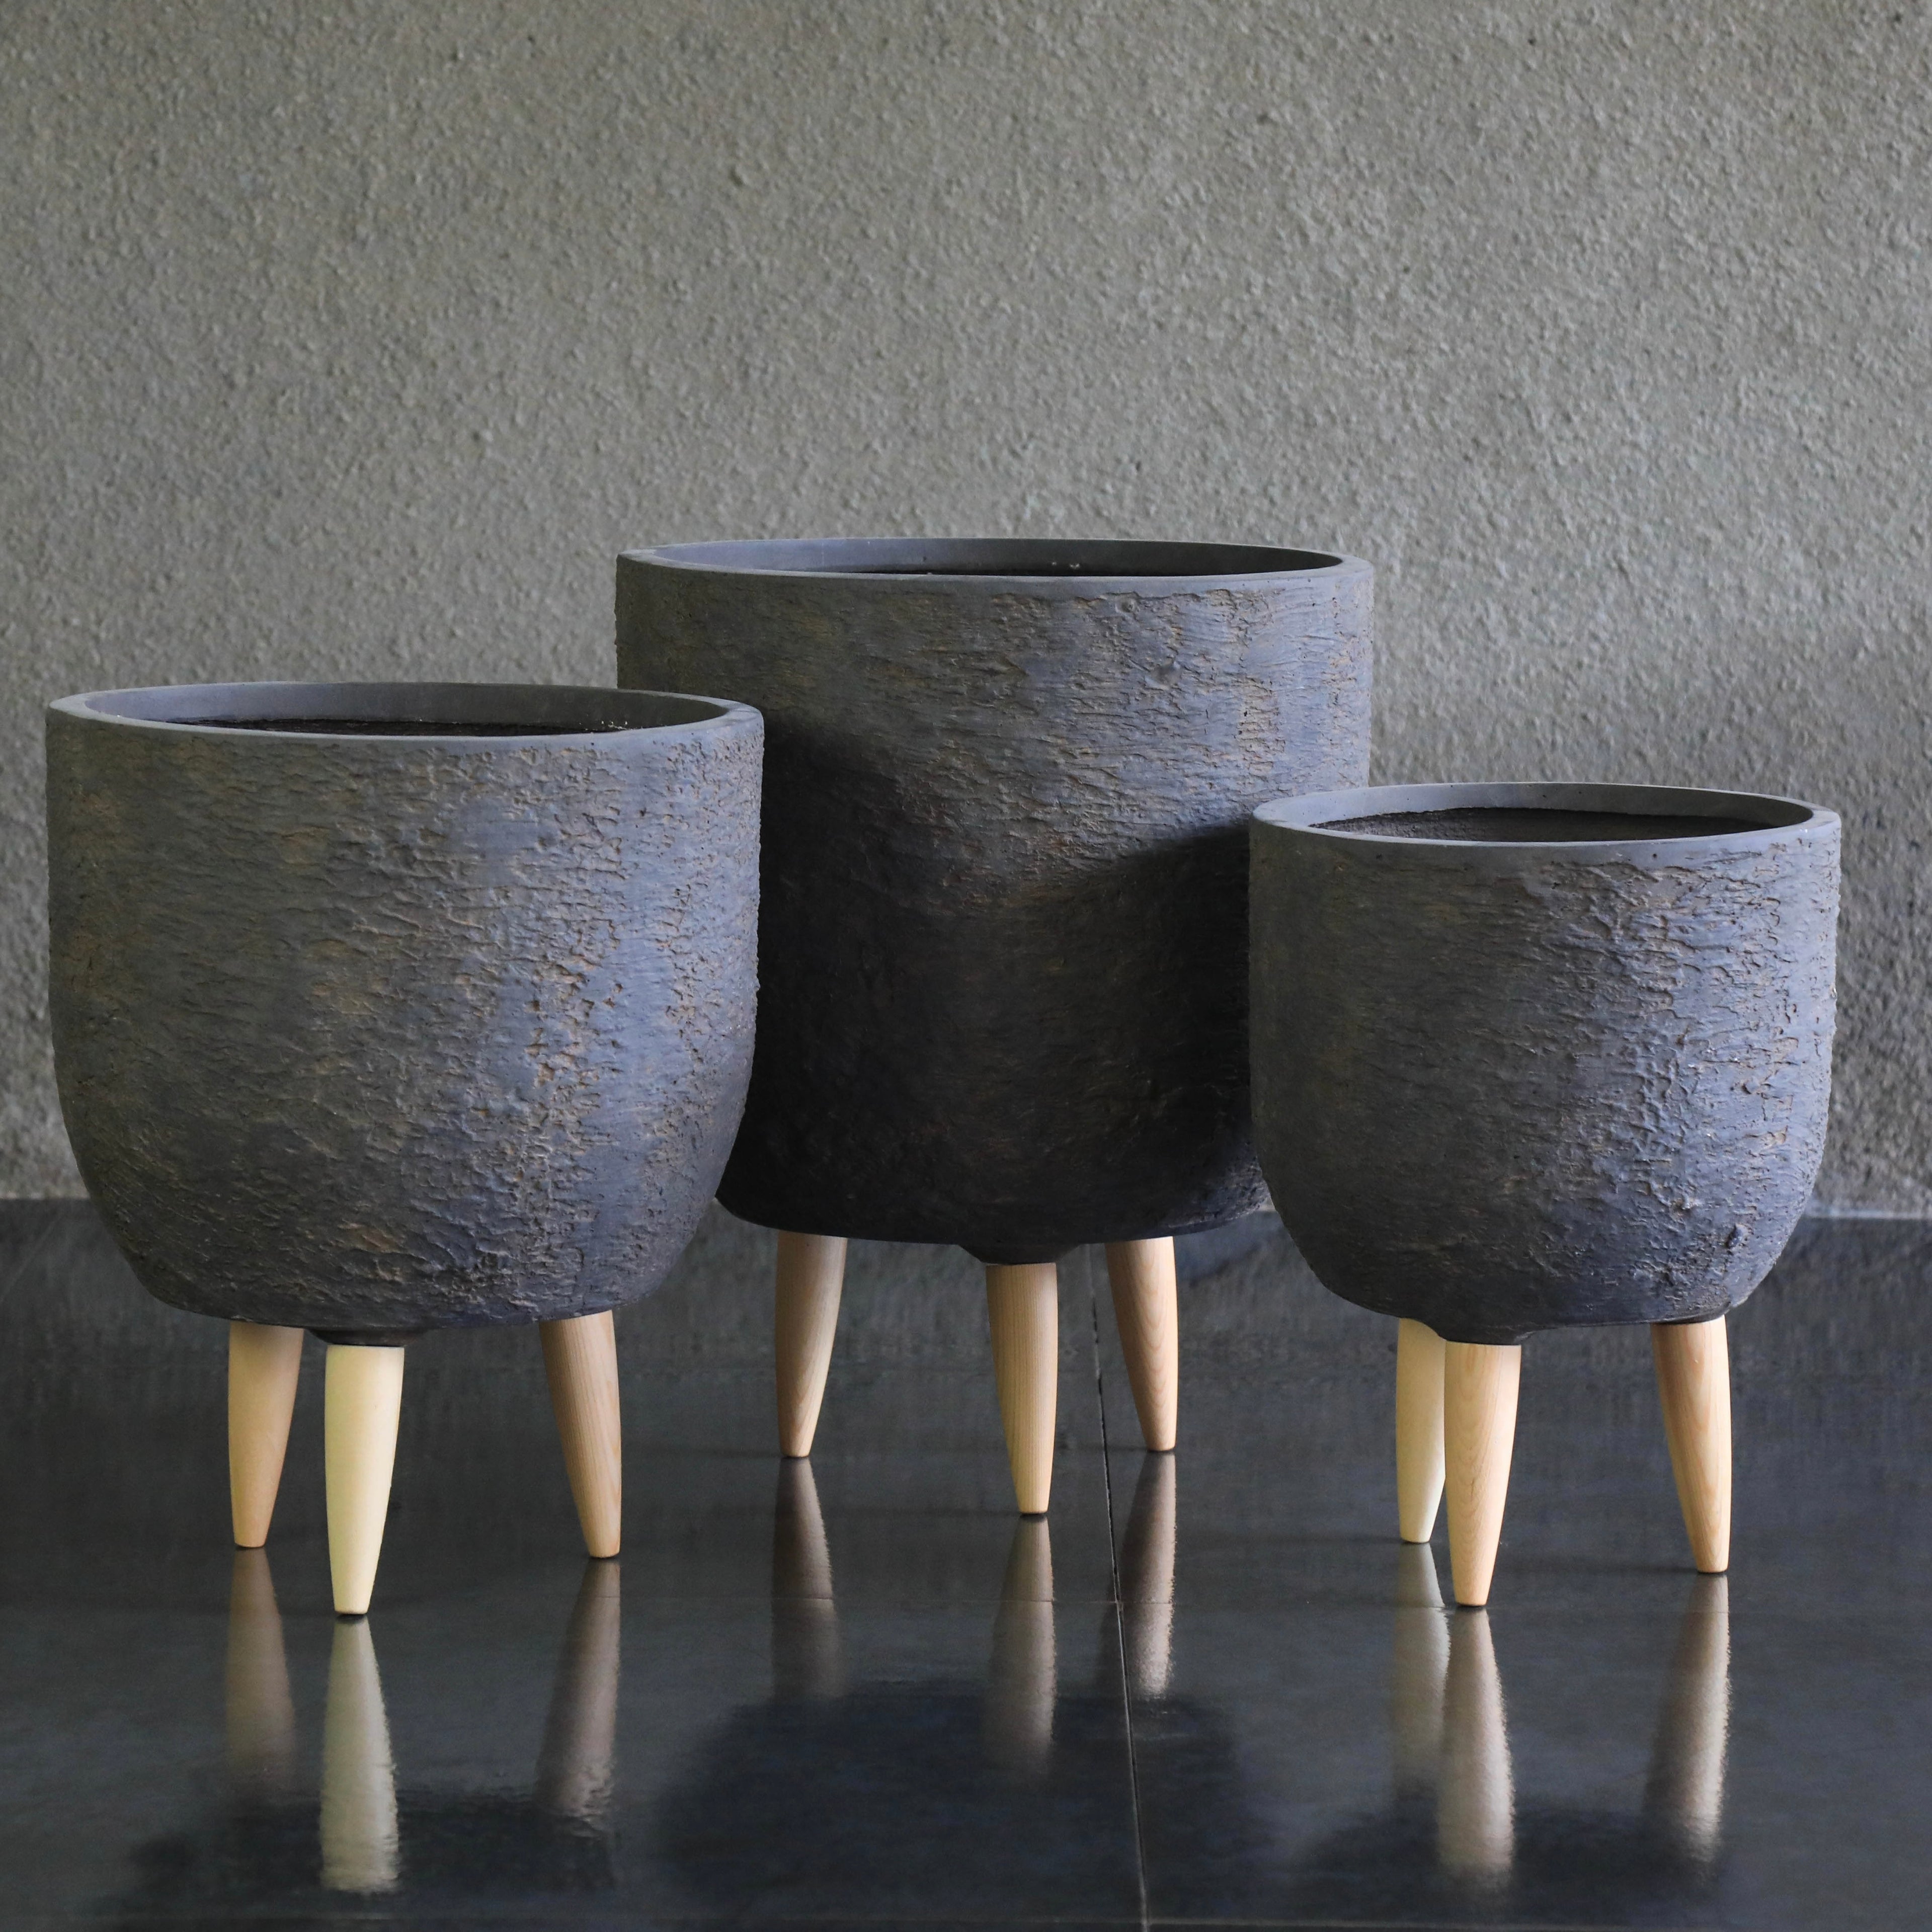 AGED STONE - Tall Indoor Fiber Cement Pot On Legs In  Aged Stone Texture - 02